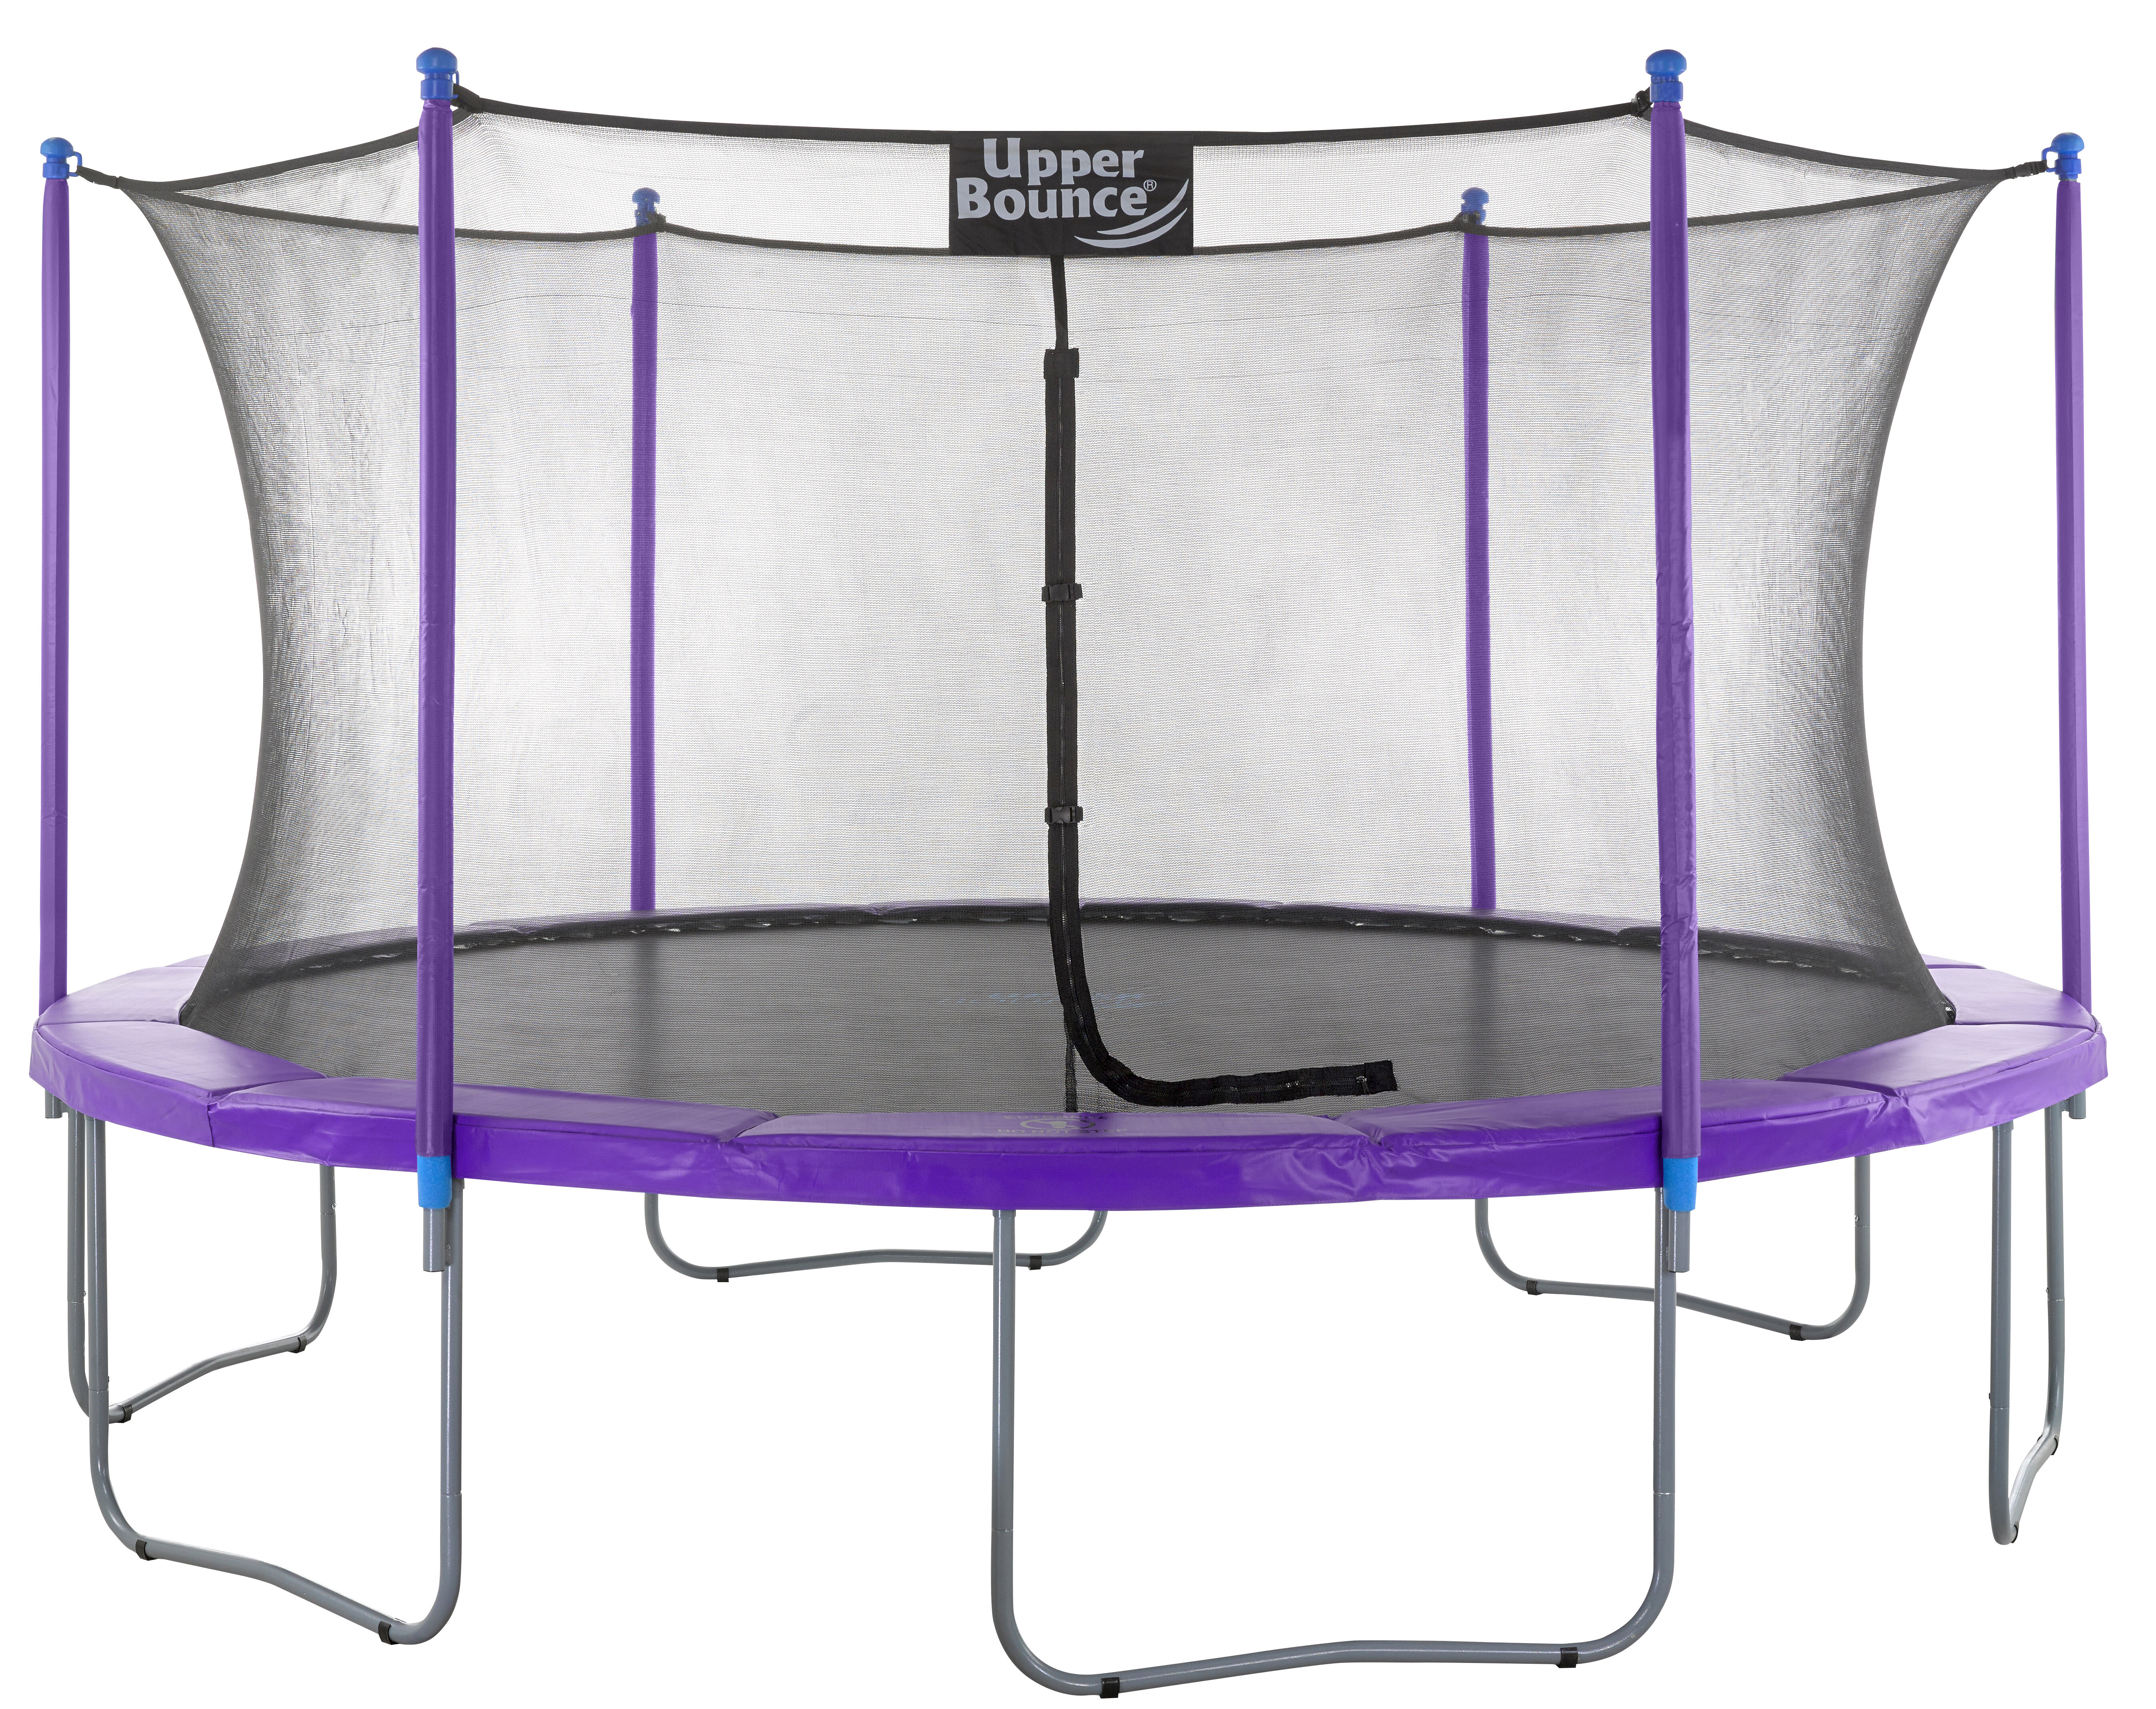 Upper Bounce 6 Pole Trampoline Enclosure Set to fit 16 FT